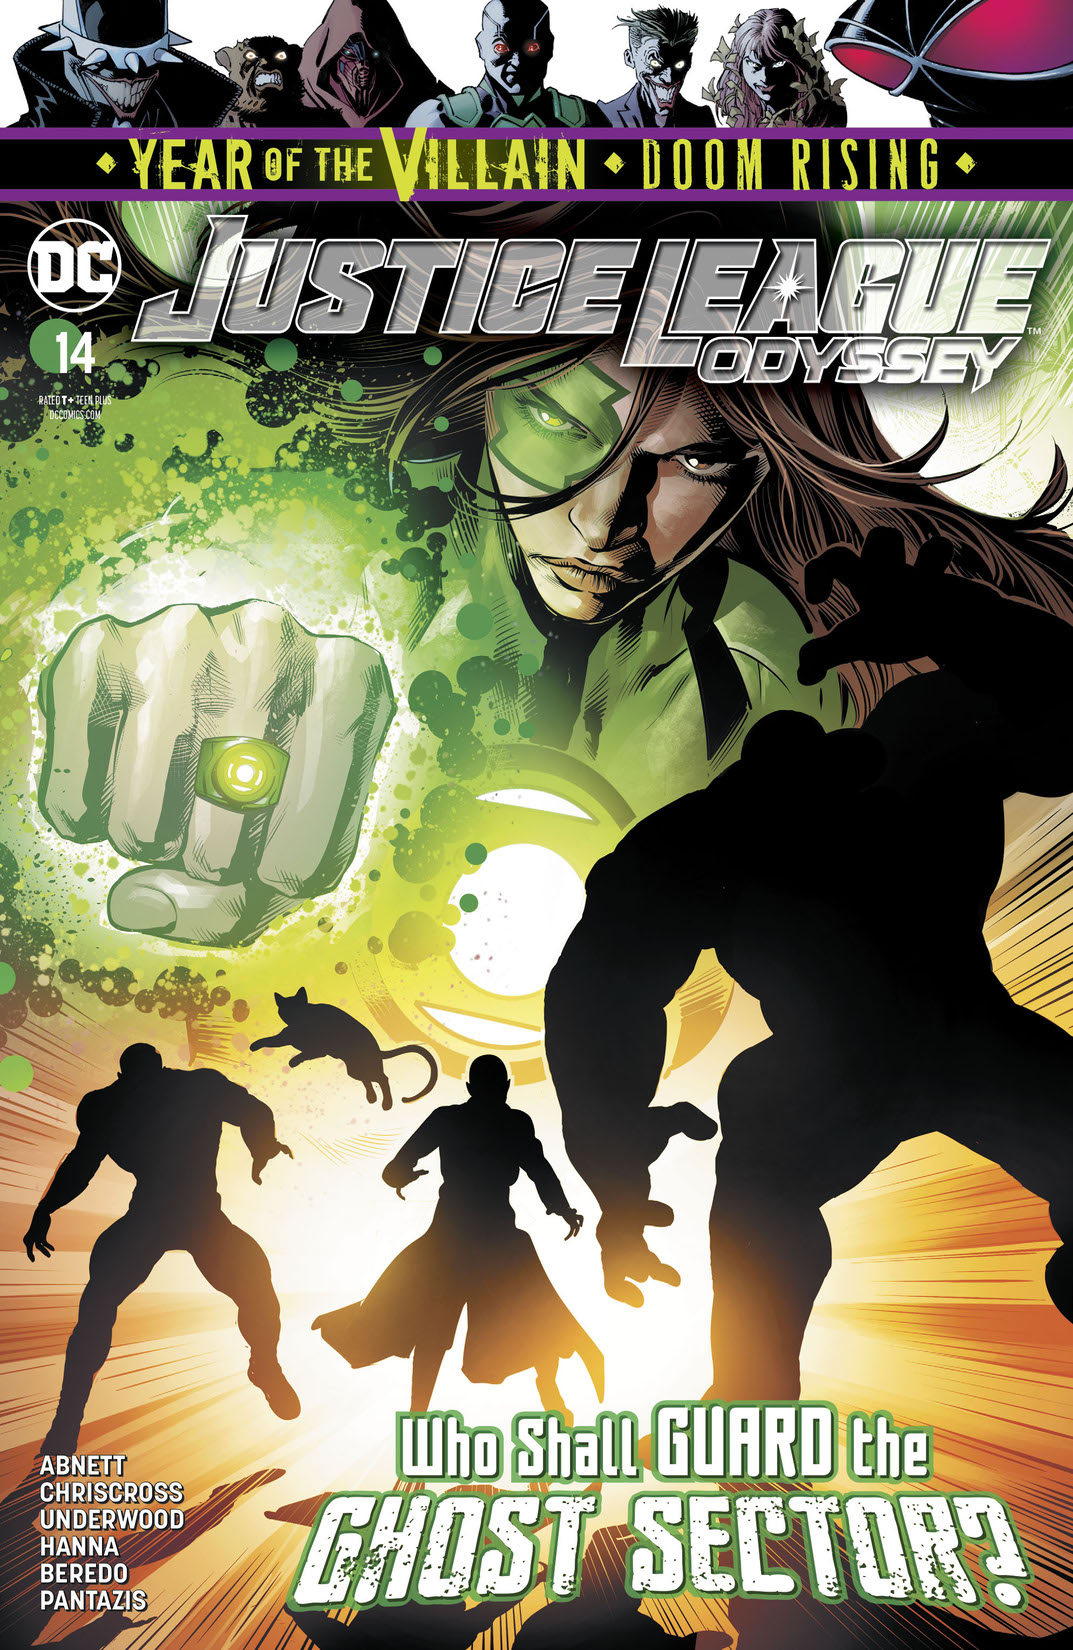 Justice League Odyssey #14 preview images